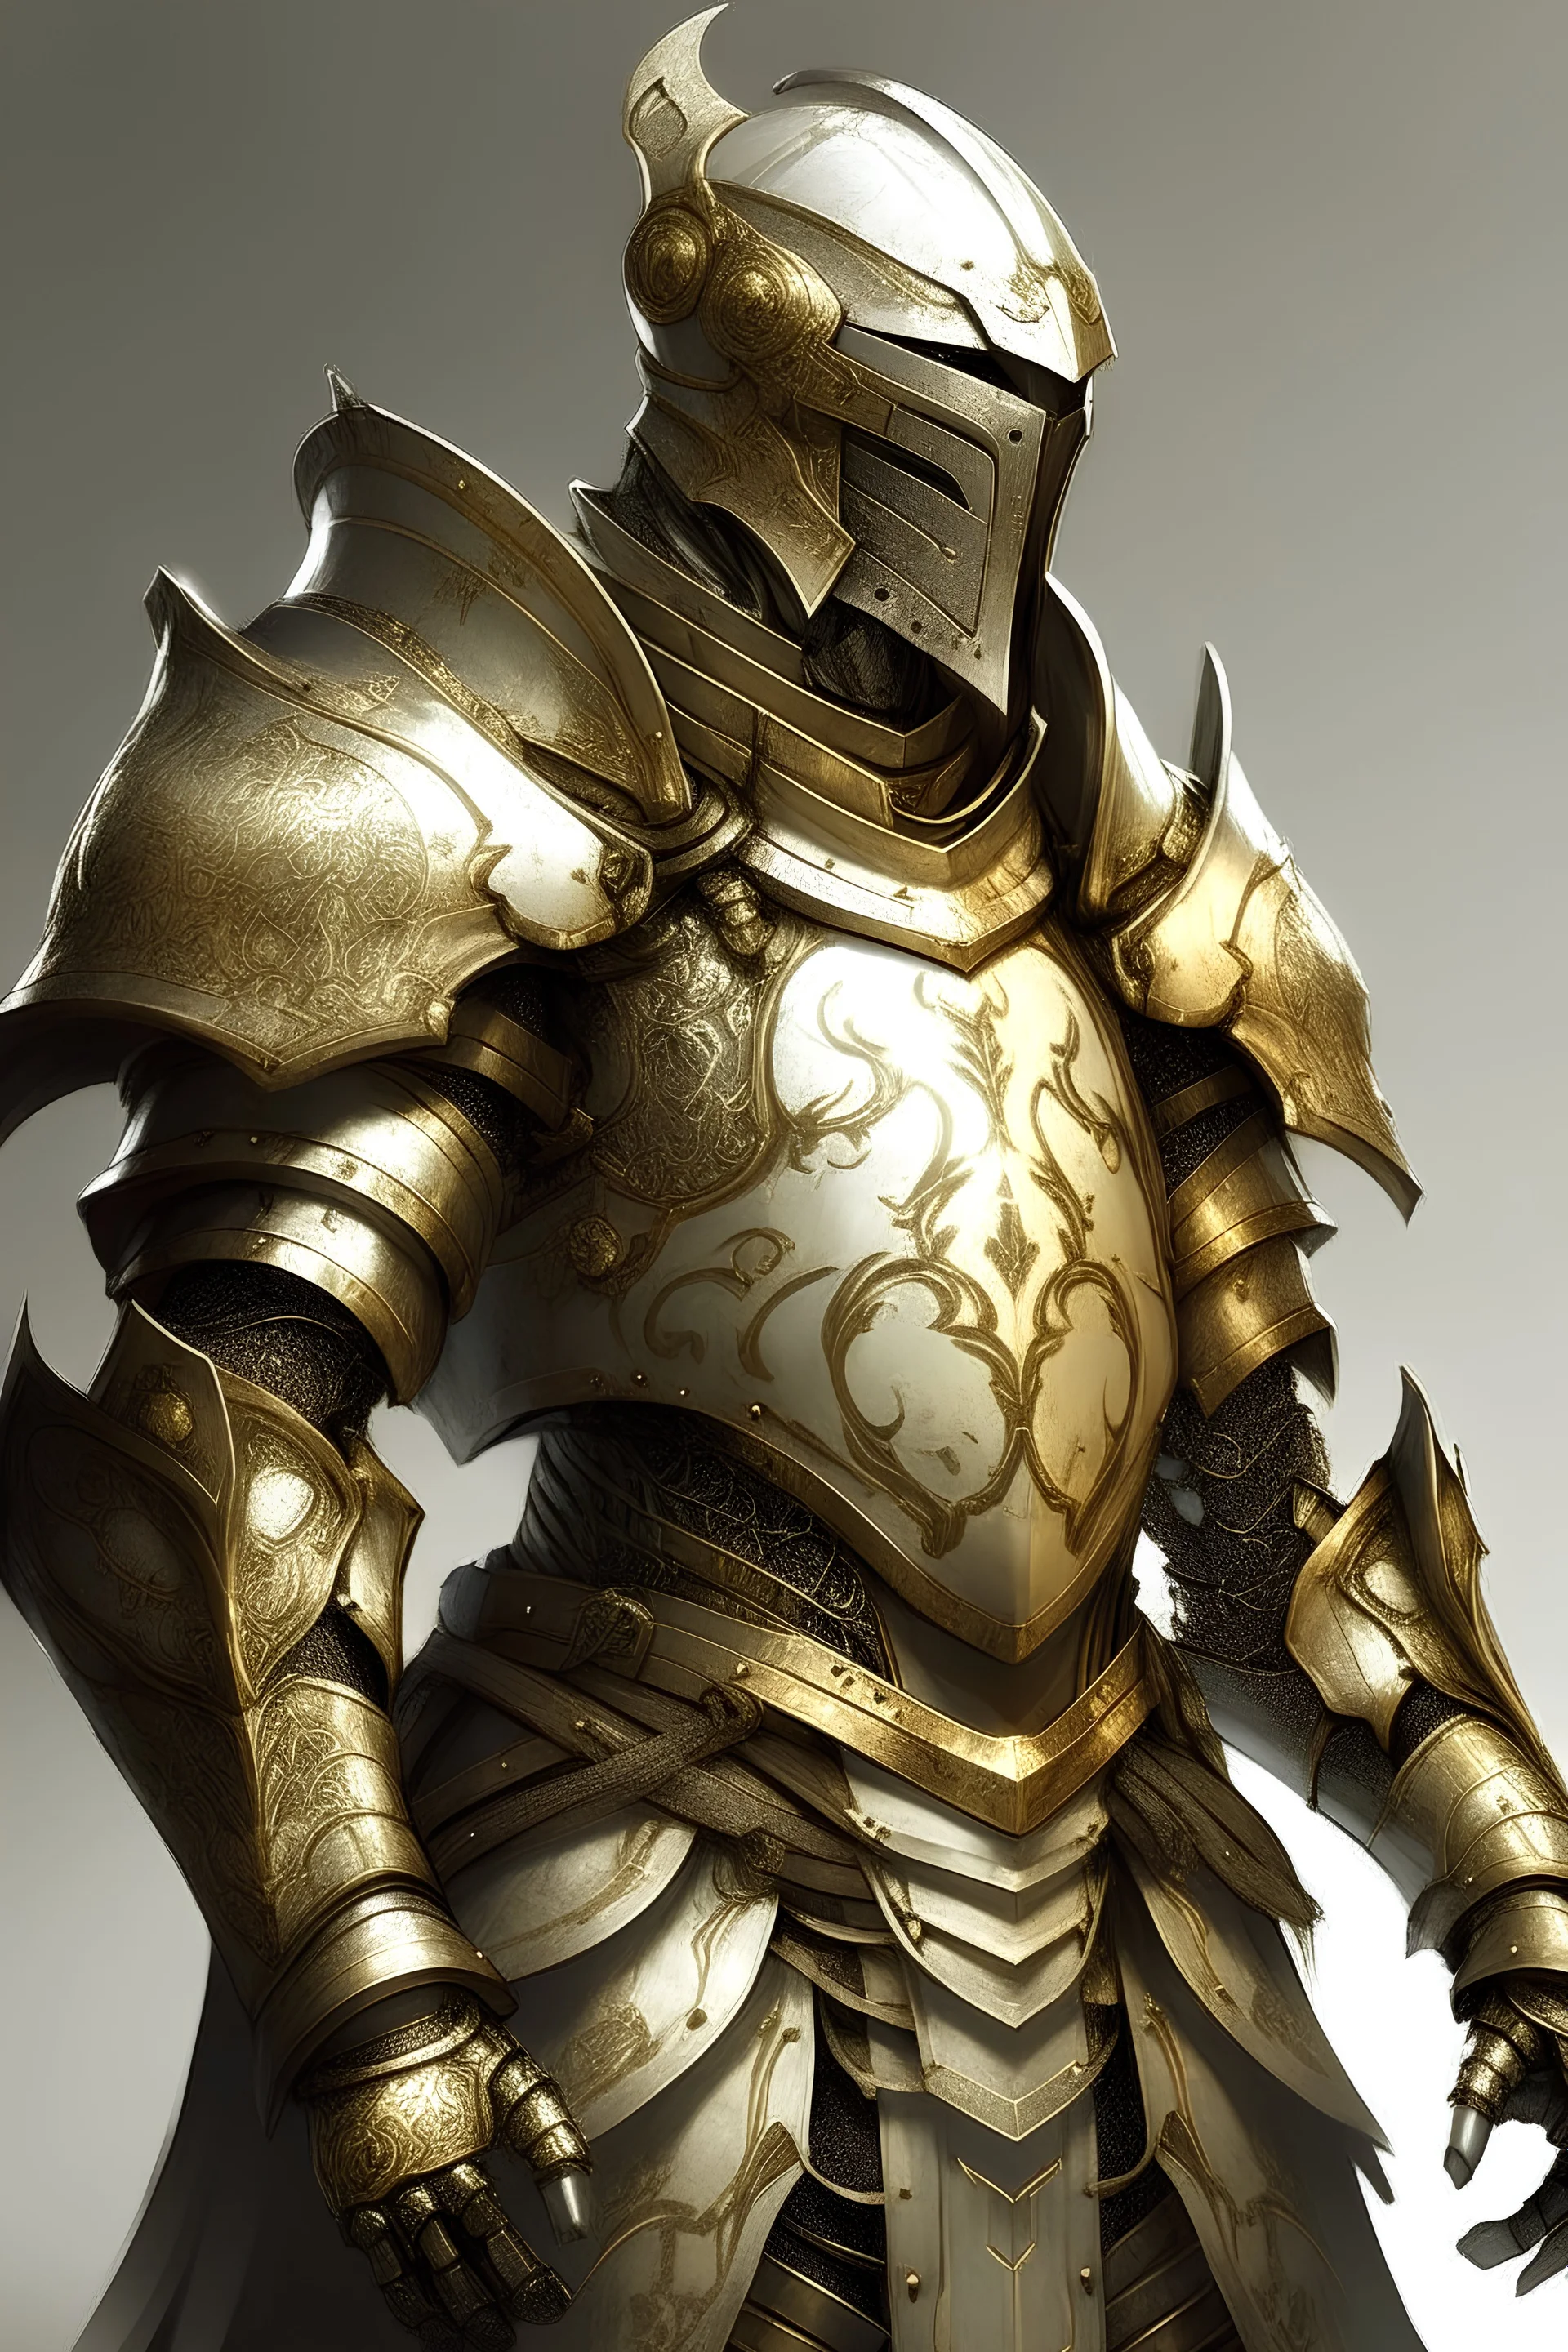 Technical concept illustration of highly advanced armour, fantasy, science fiction, Paladin